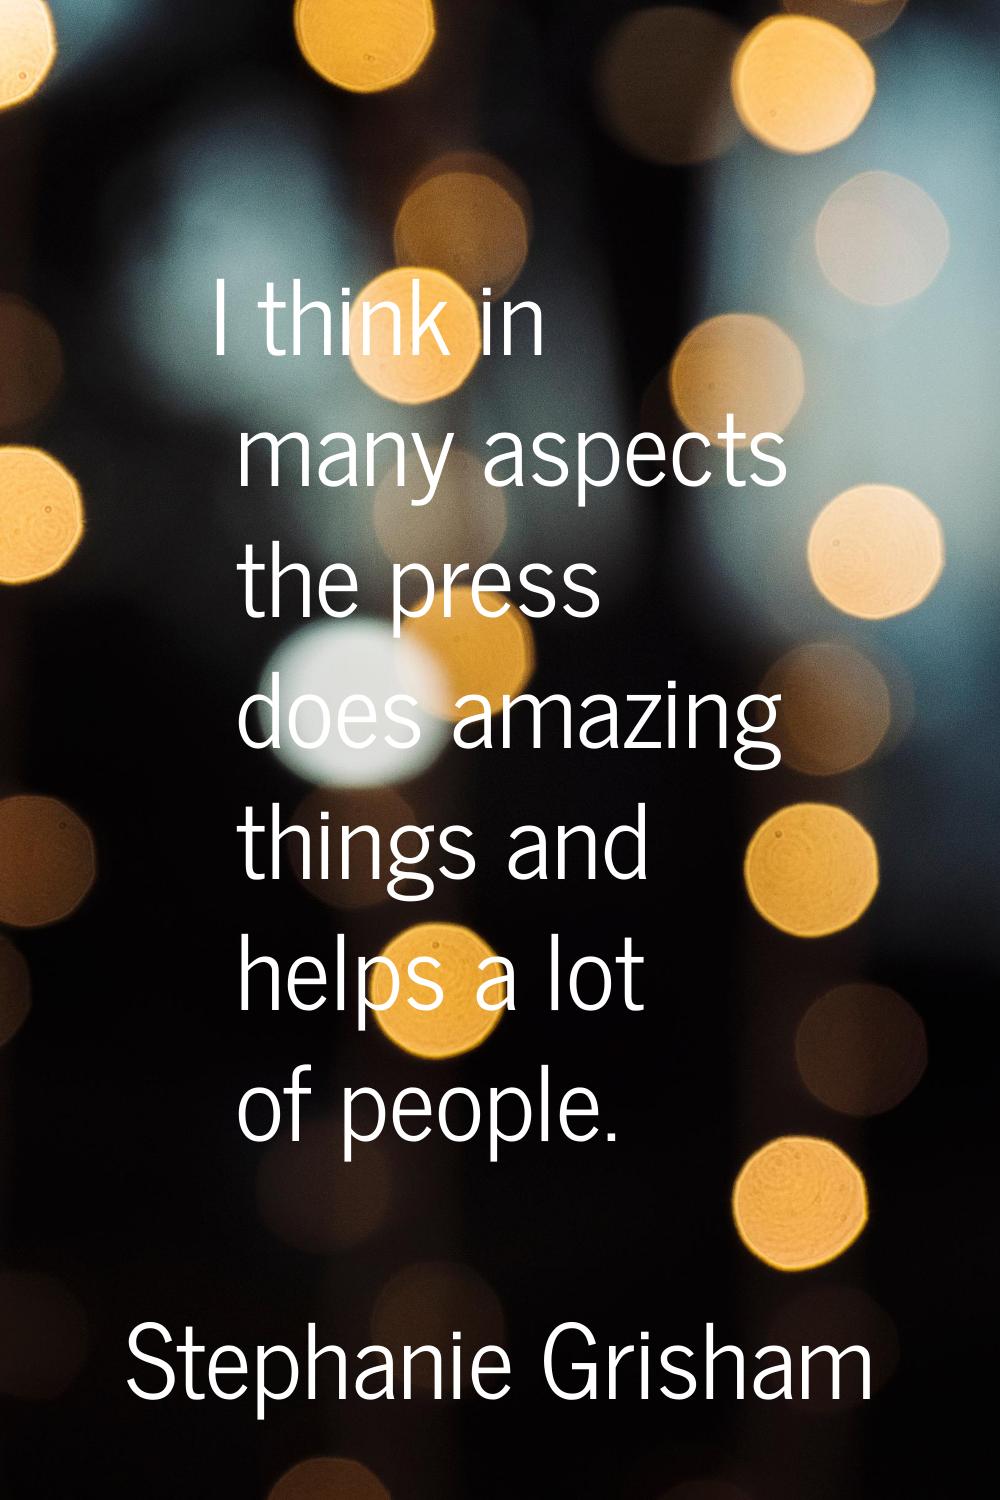 I think in many aspects the press does amazing things and helps a lot of people.